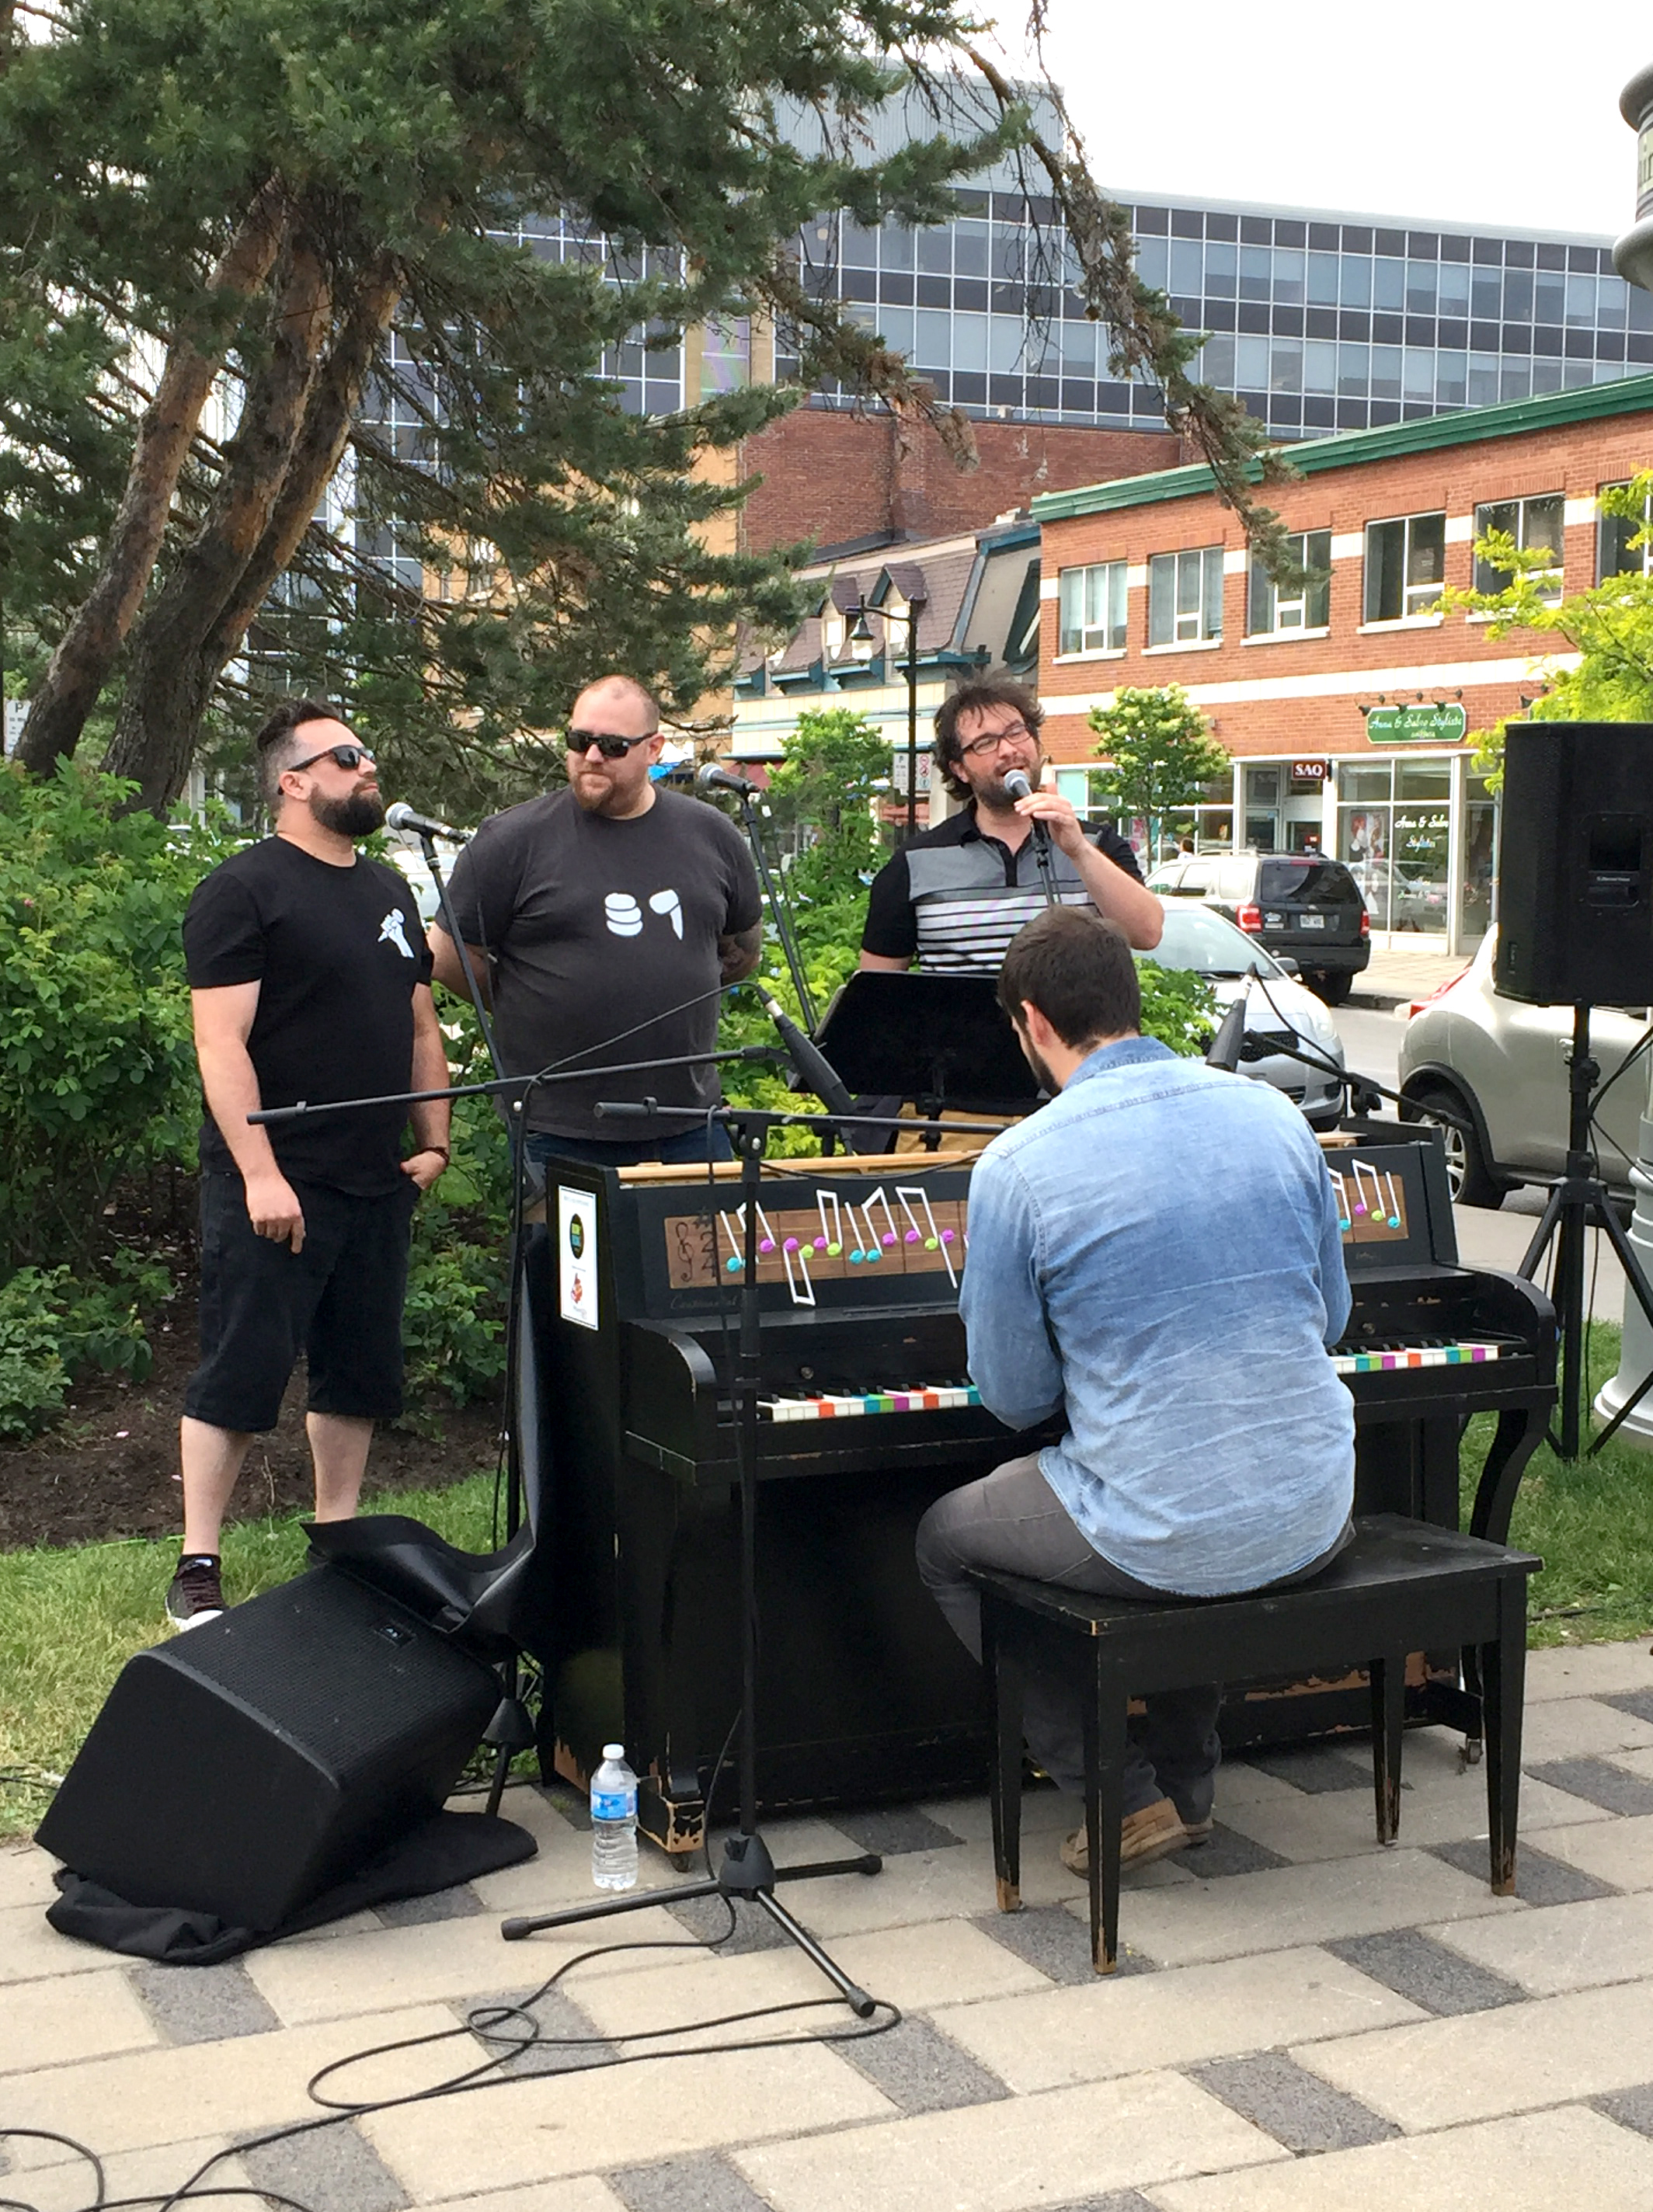 The public piano is back at Gordon Park!